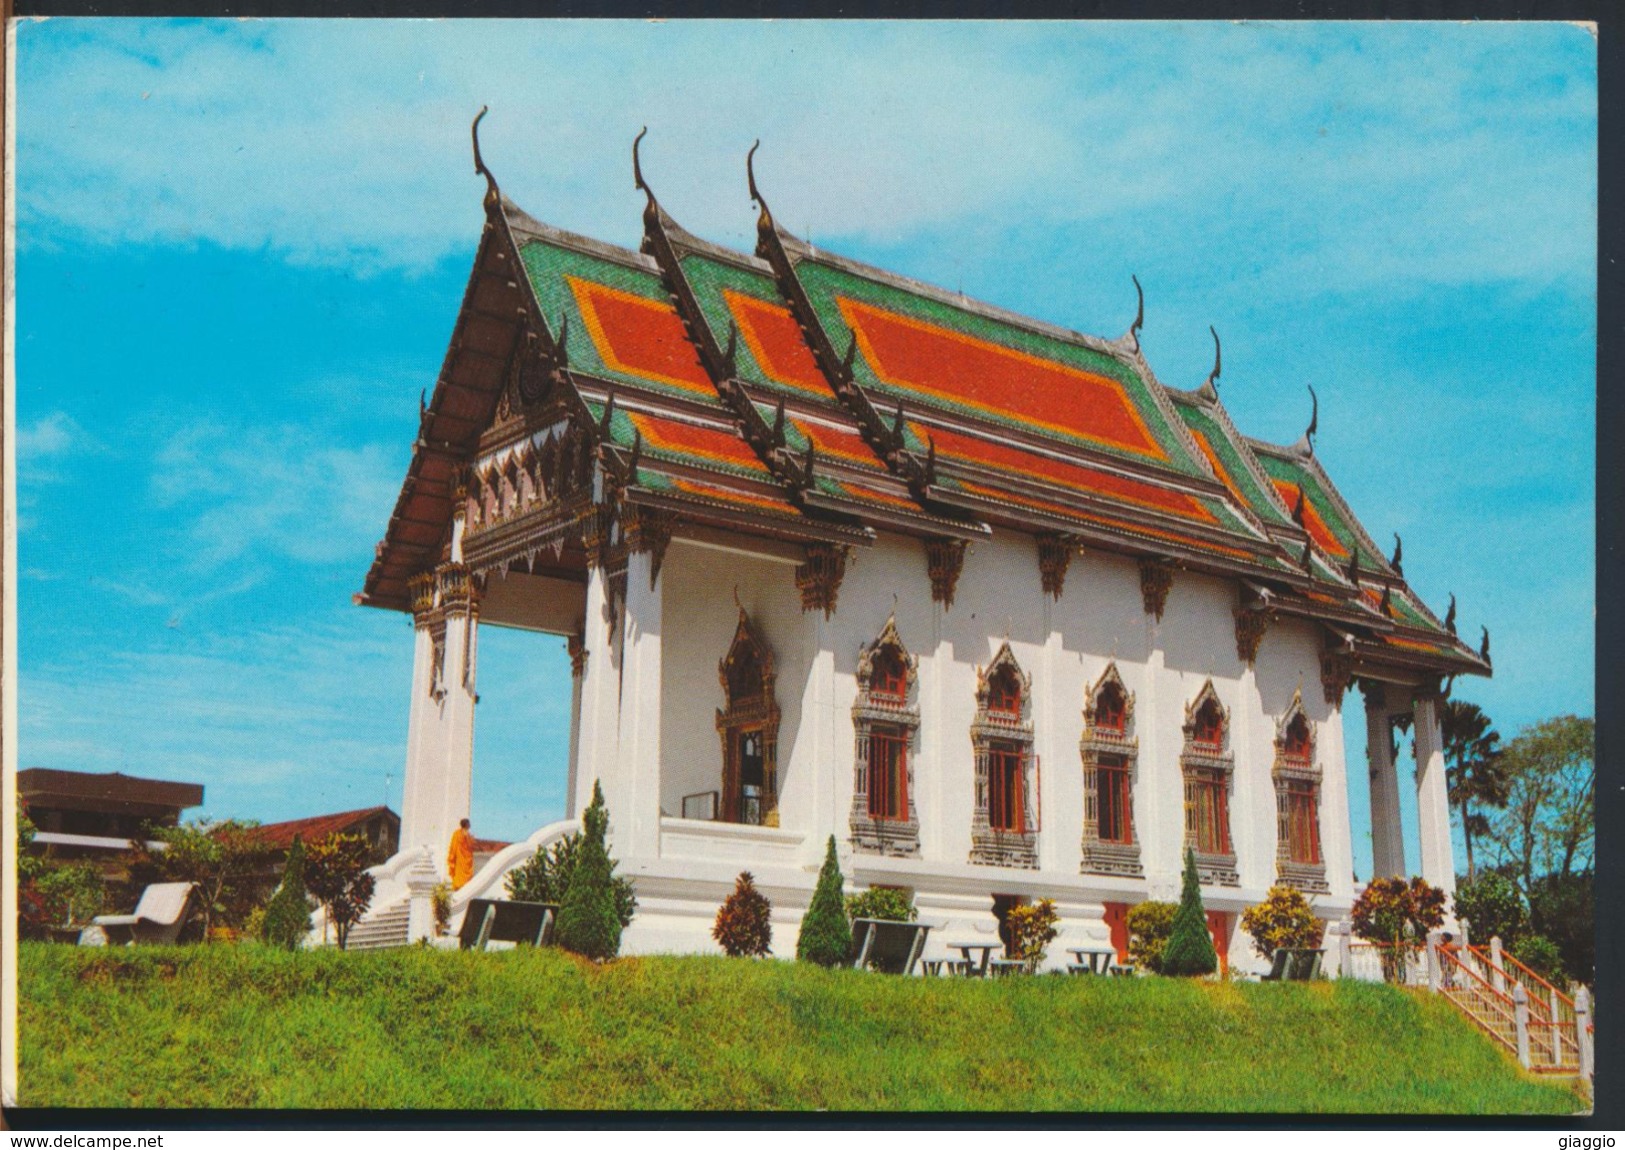 °°° 1206 - MALAYSIA - SIAMESE TEMPLE - 1978 With Stamps °°° - Malesia